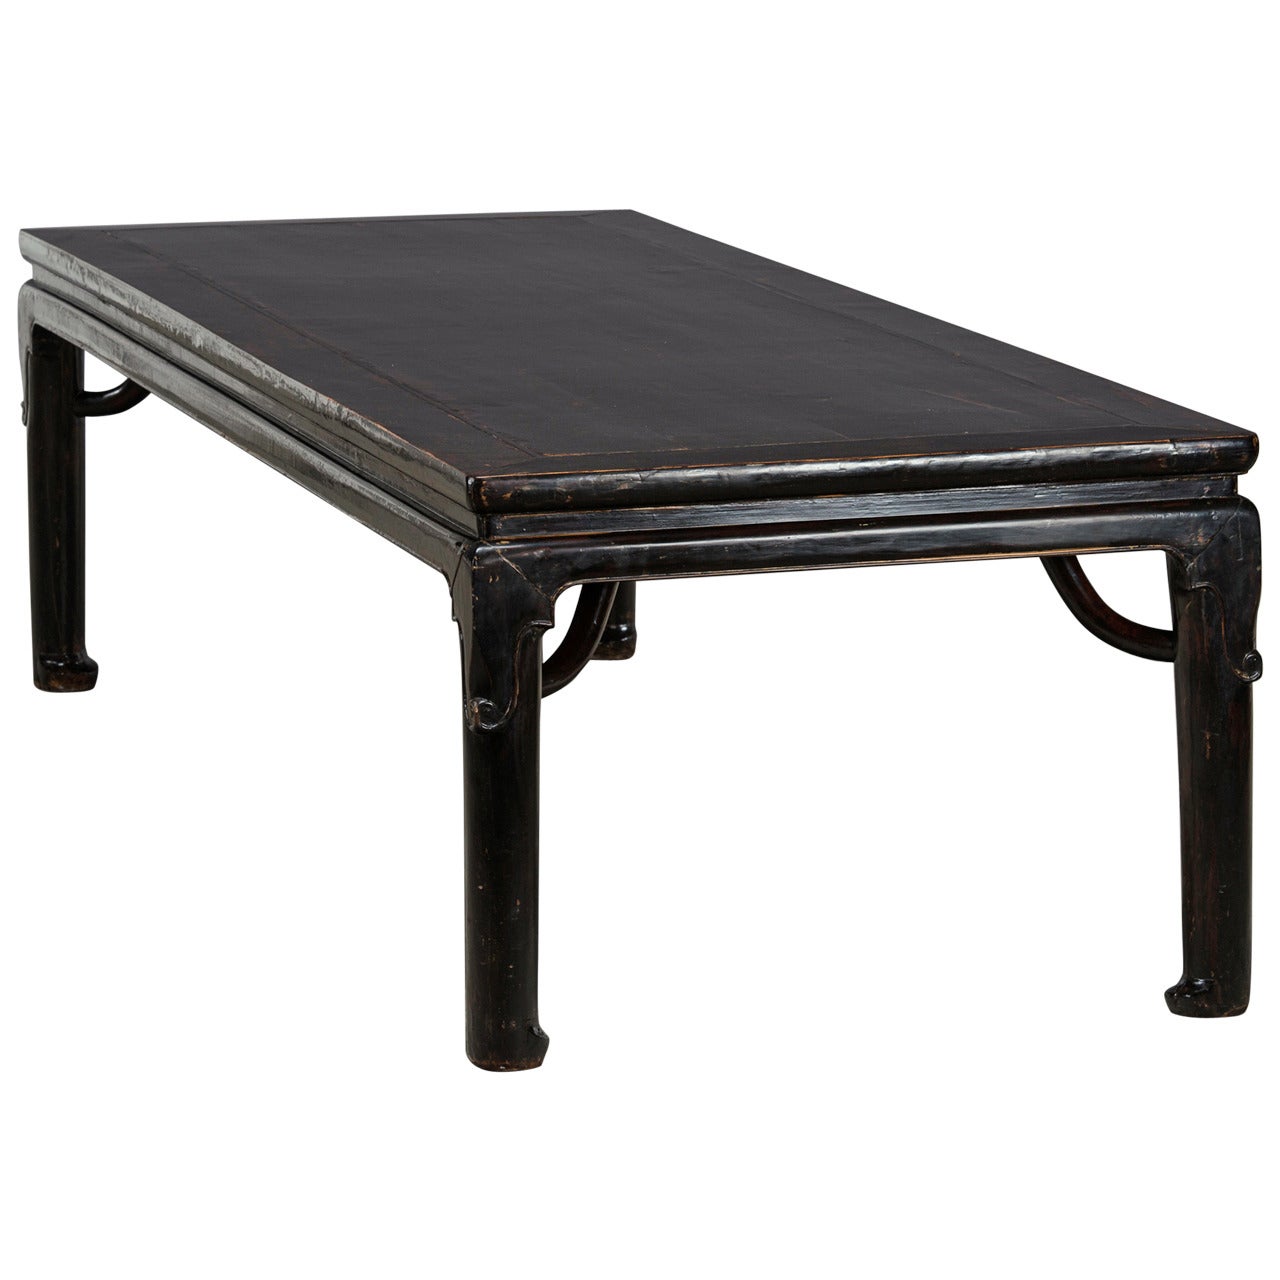 Large Black Lacquer Dining Table, Mid-19th Century